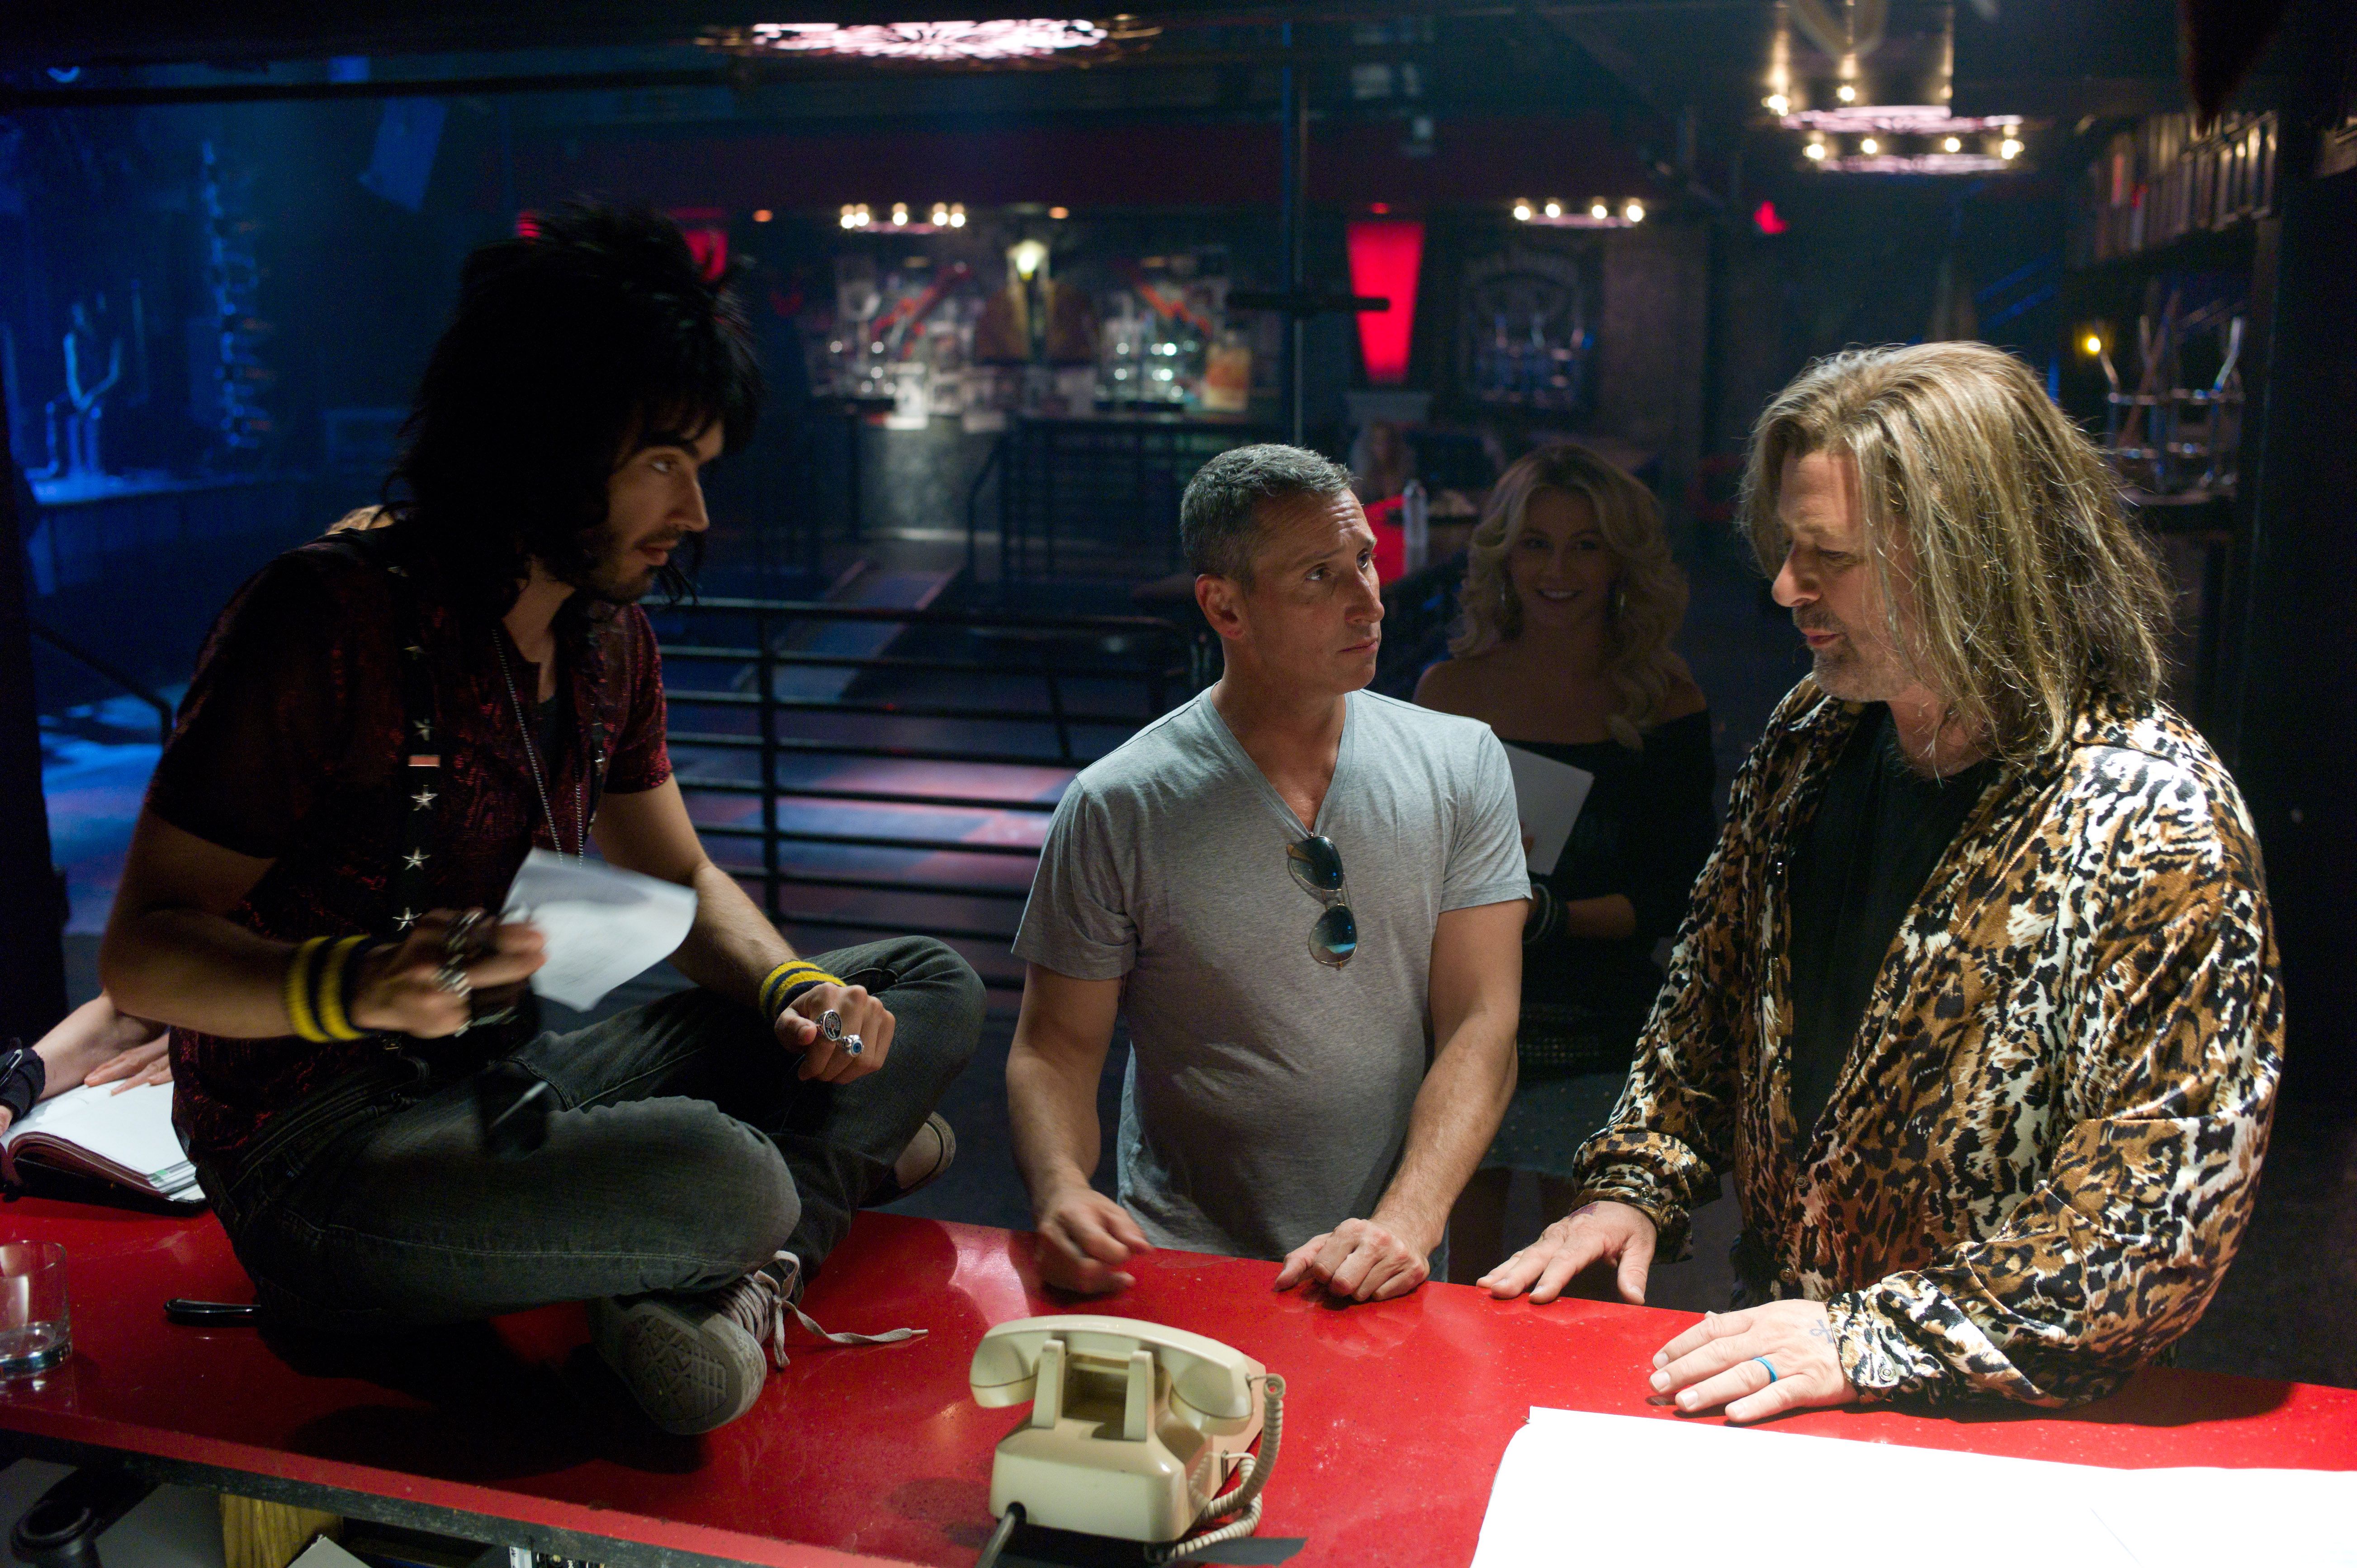 ROCK OF AGES Movie Images Featuring Tom Cruise | Collider5212 x 3468